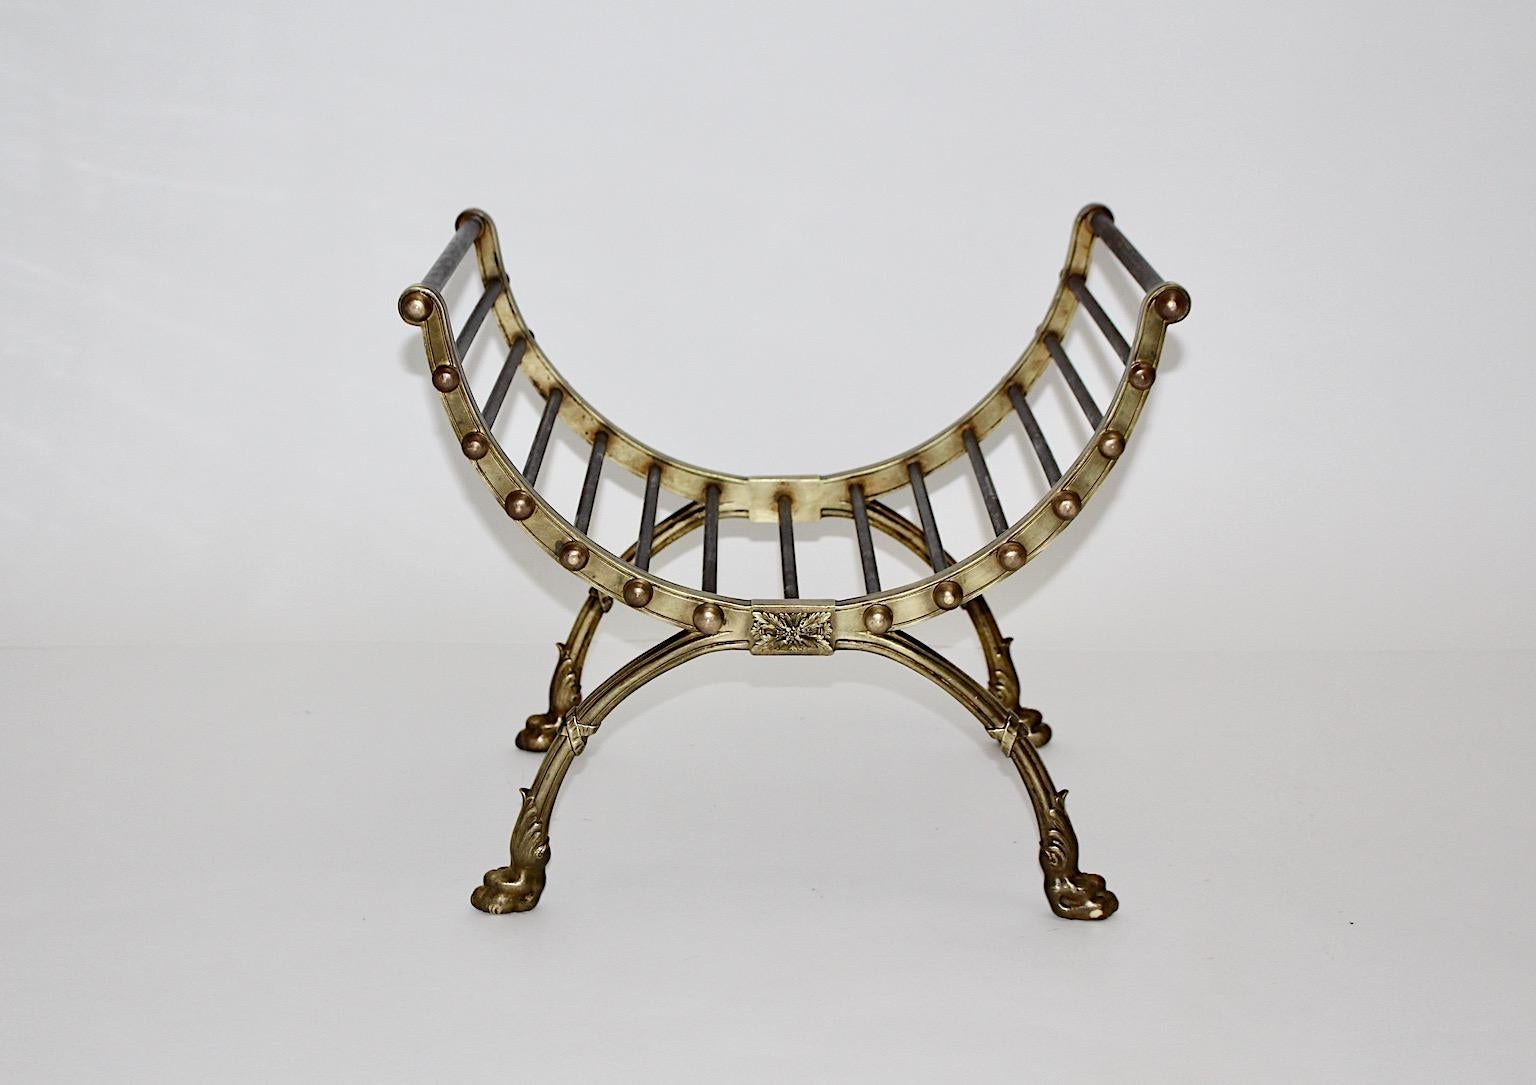 Baroque revival vintage firewood rack or firewood cradle or firewood holder from cast brass and iron circa 1890, France.
A beautiful firewood rack from cast brass and iron with amazing decor as lion paws and ribbons.
This rare firewood rack shows